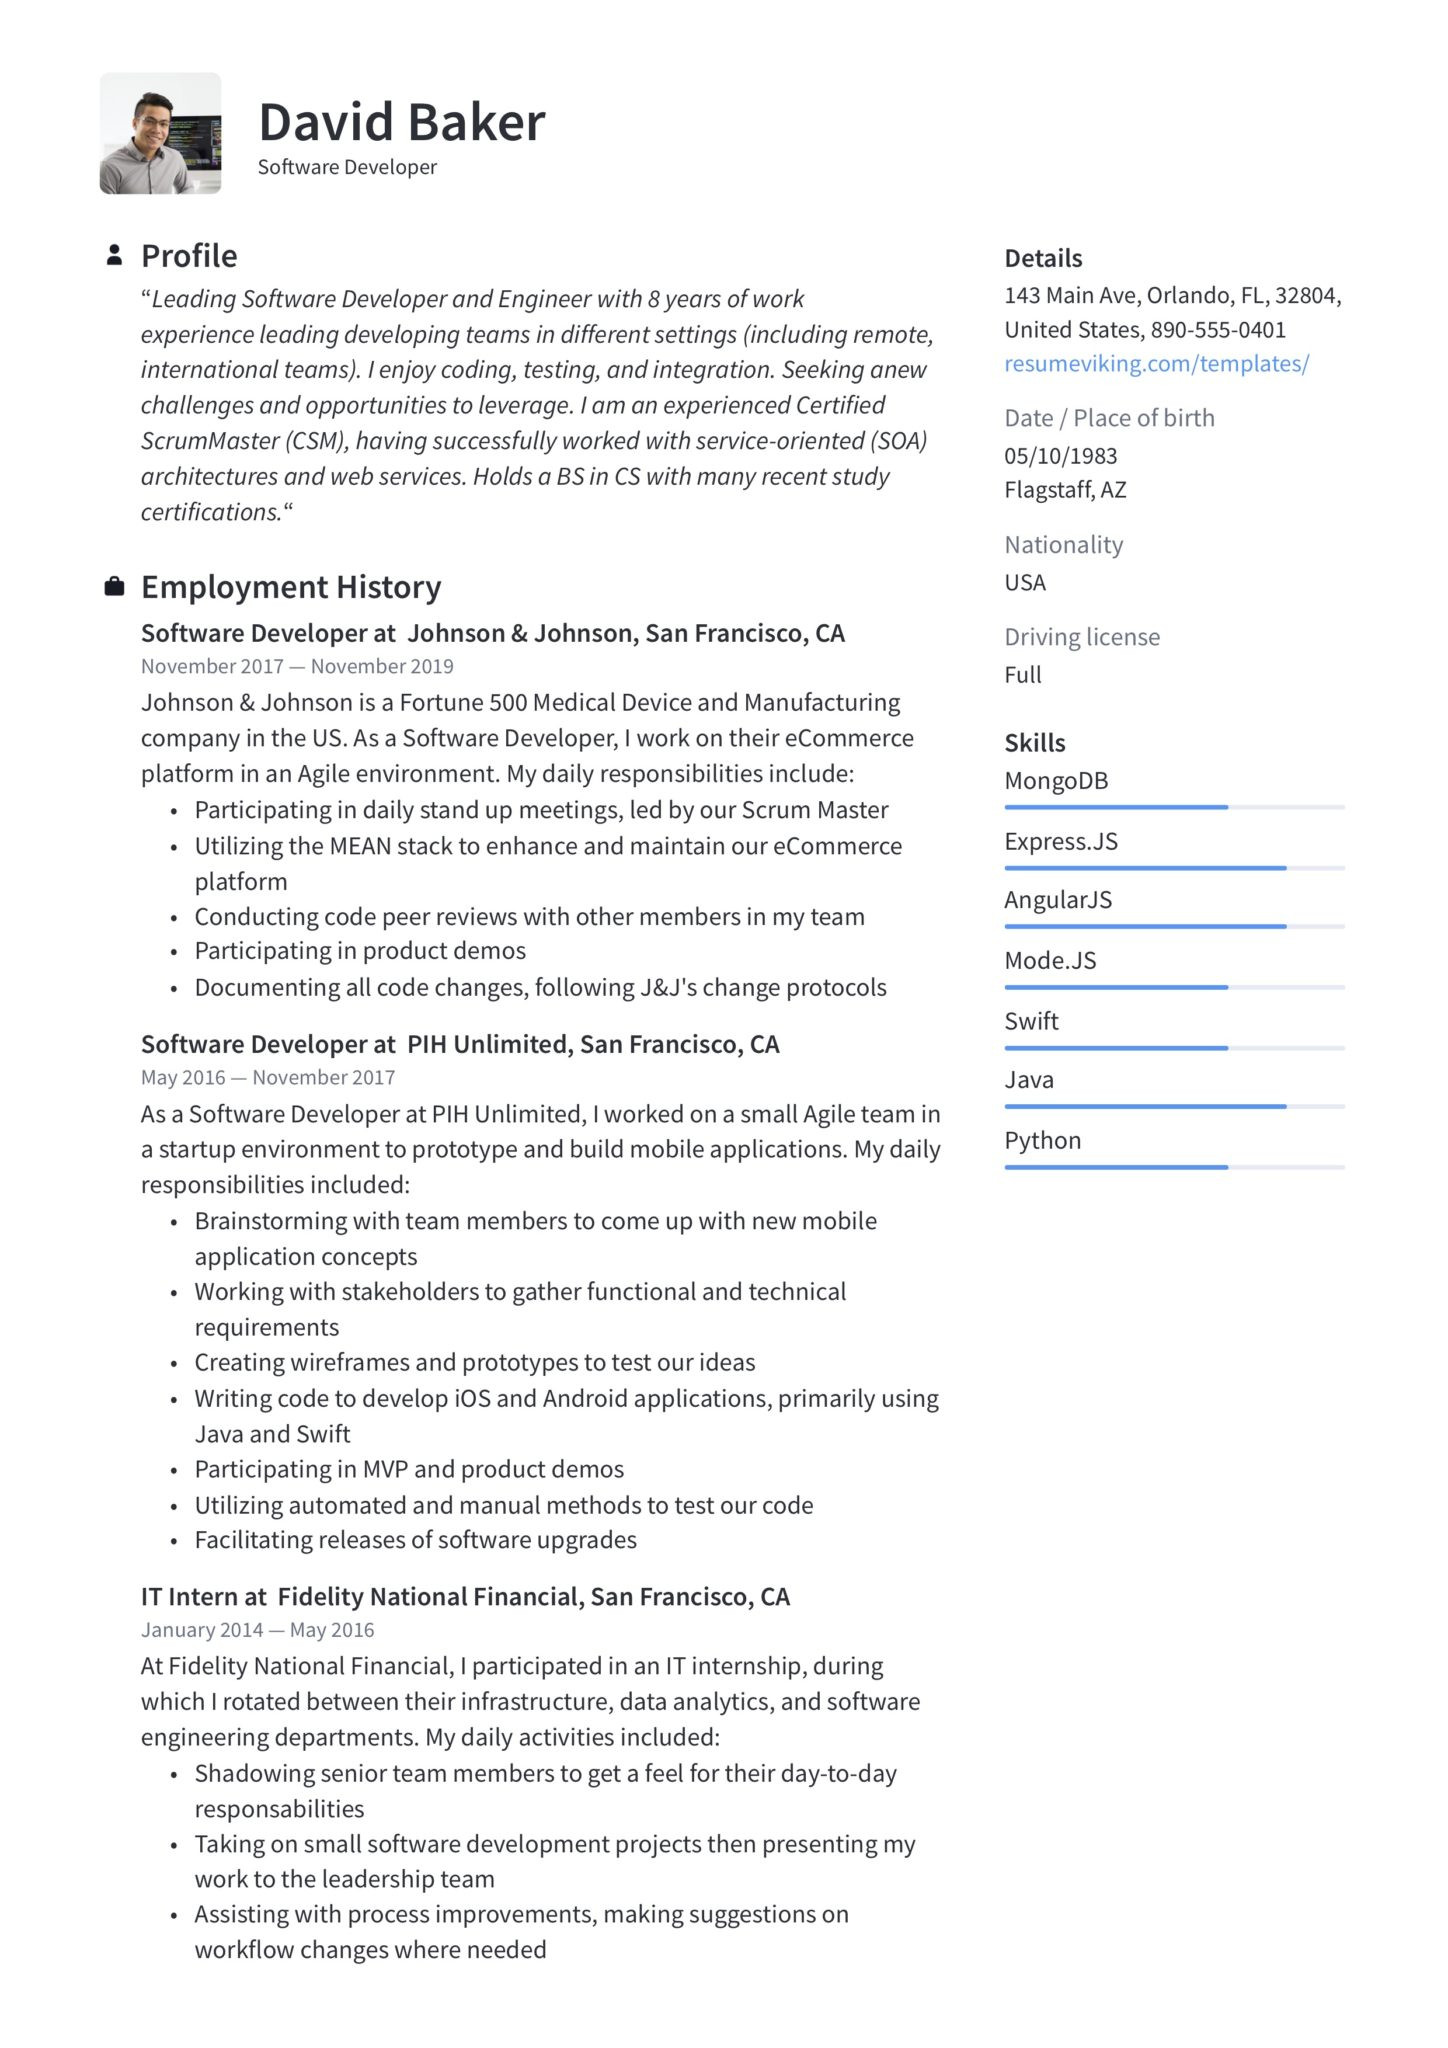 Websphere Application Server Experience Sample Resumes Doc format Guide: software Developer Resume  19 Examples Word & Pdf 2020